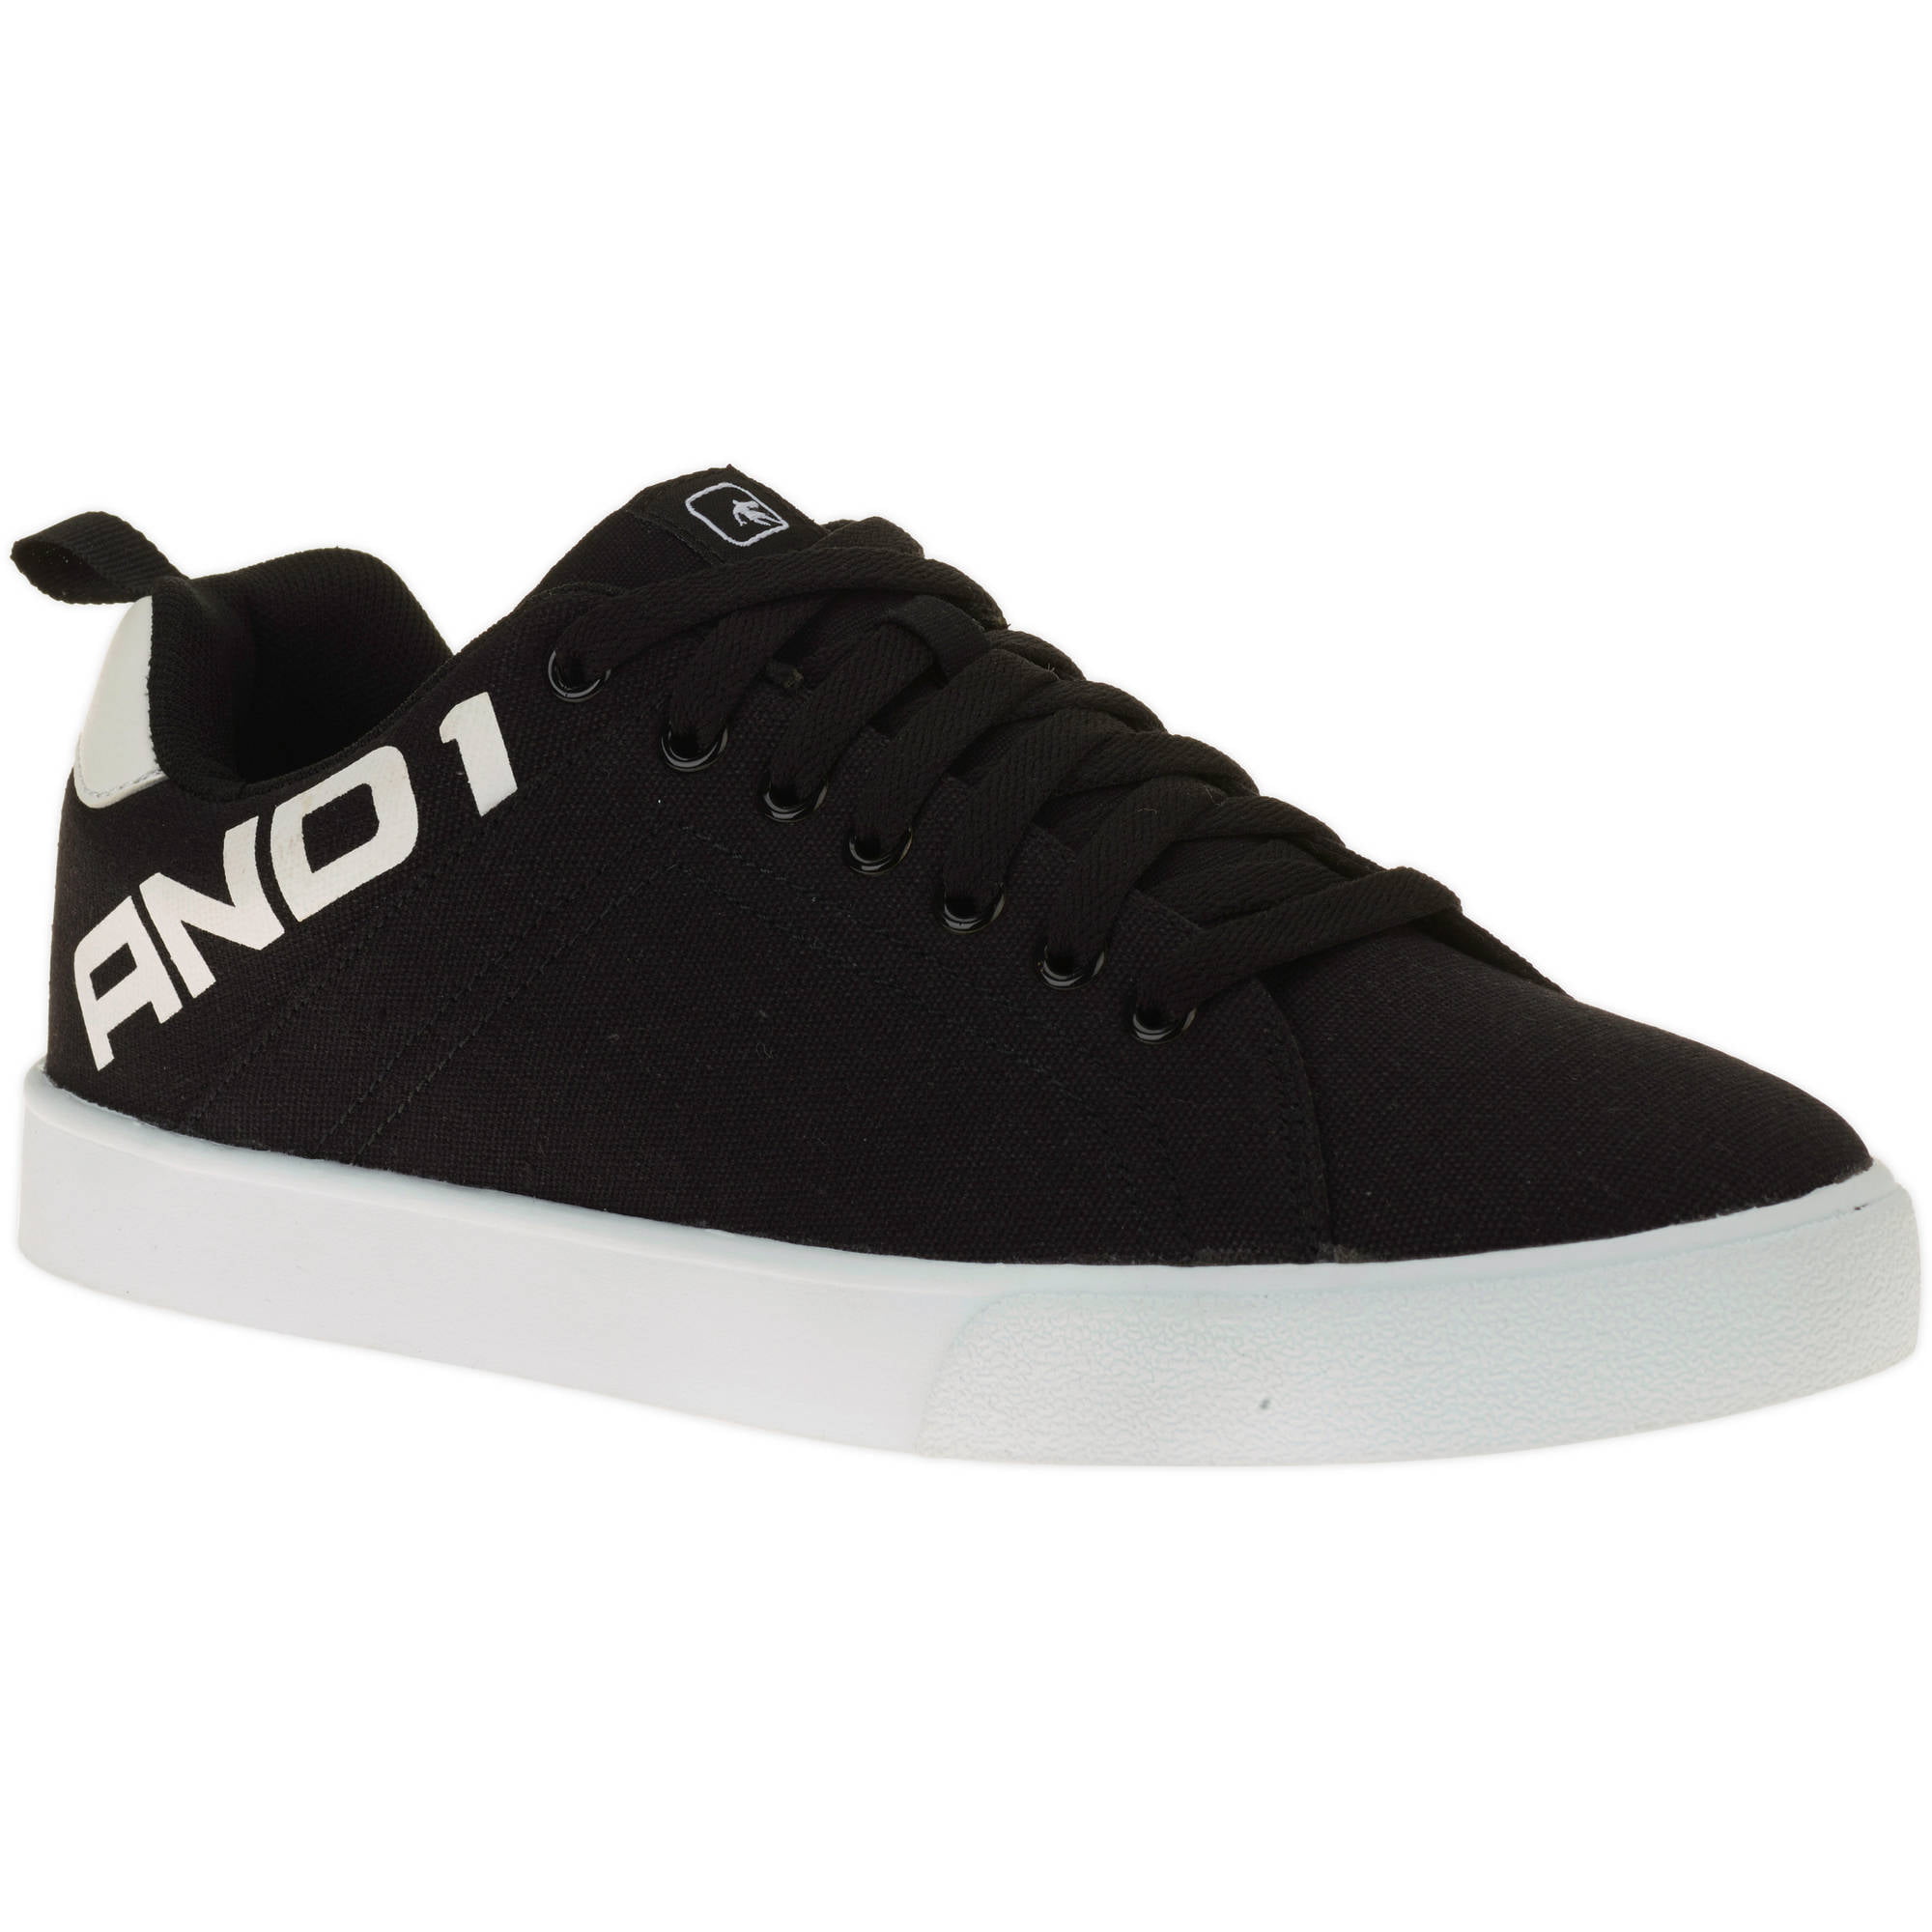 11 10 And1 Fundamental Men’s Low Cut Canvas Sneakers Black/White 7 